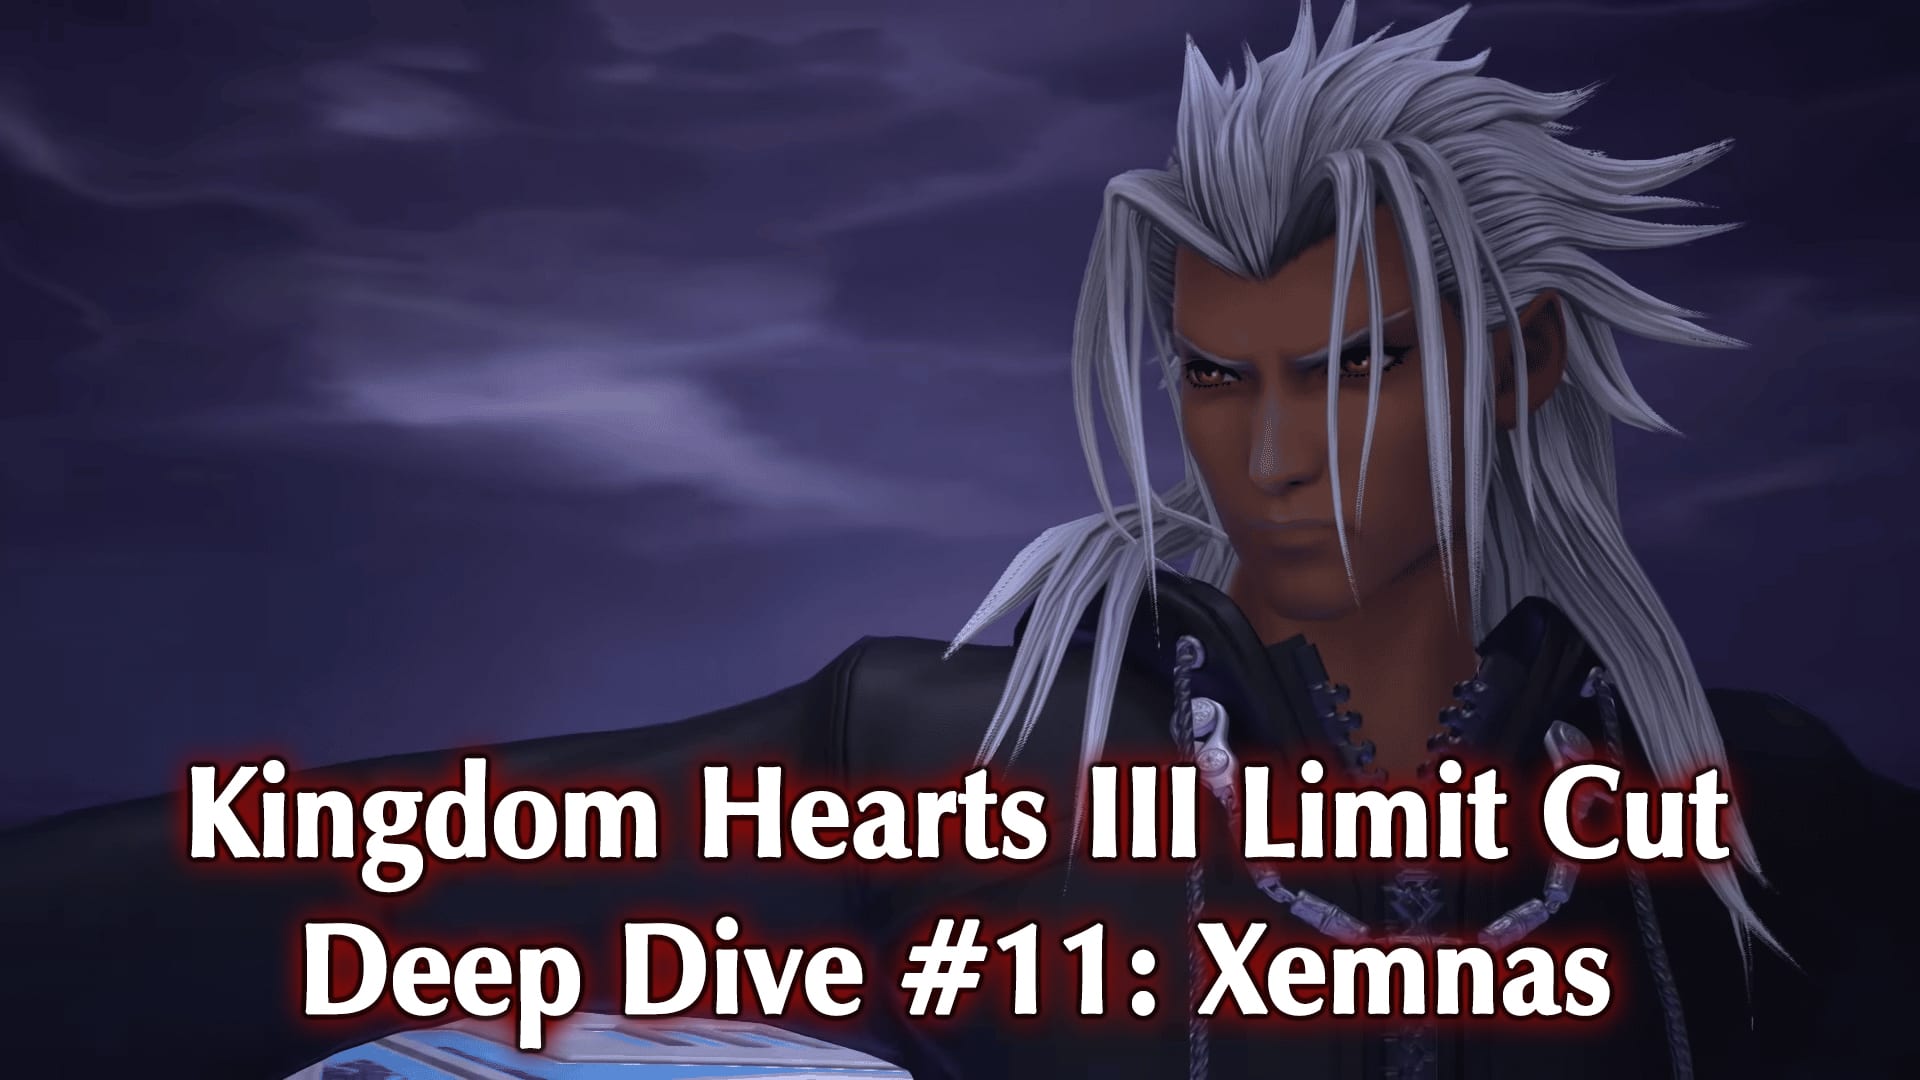 What Makes The Xemnas Data Battle So Awesome; Kingdom Hearts III Limit Cut Deep Dive #11